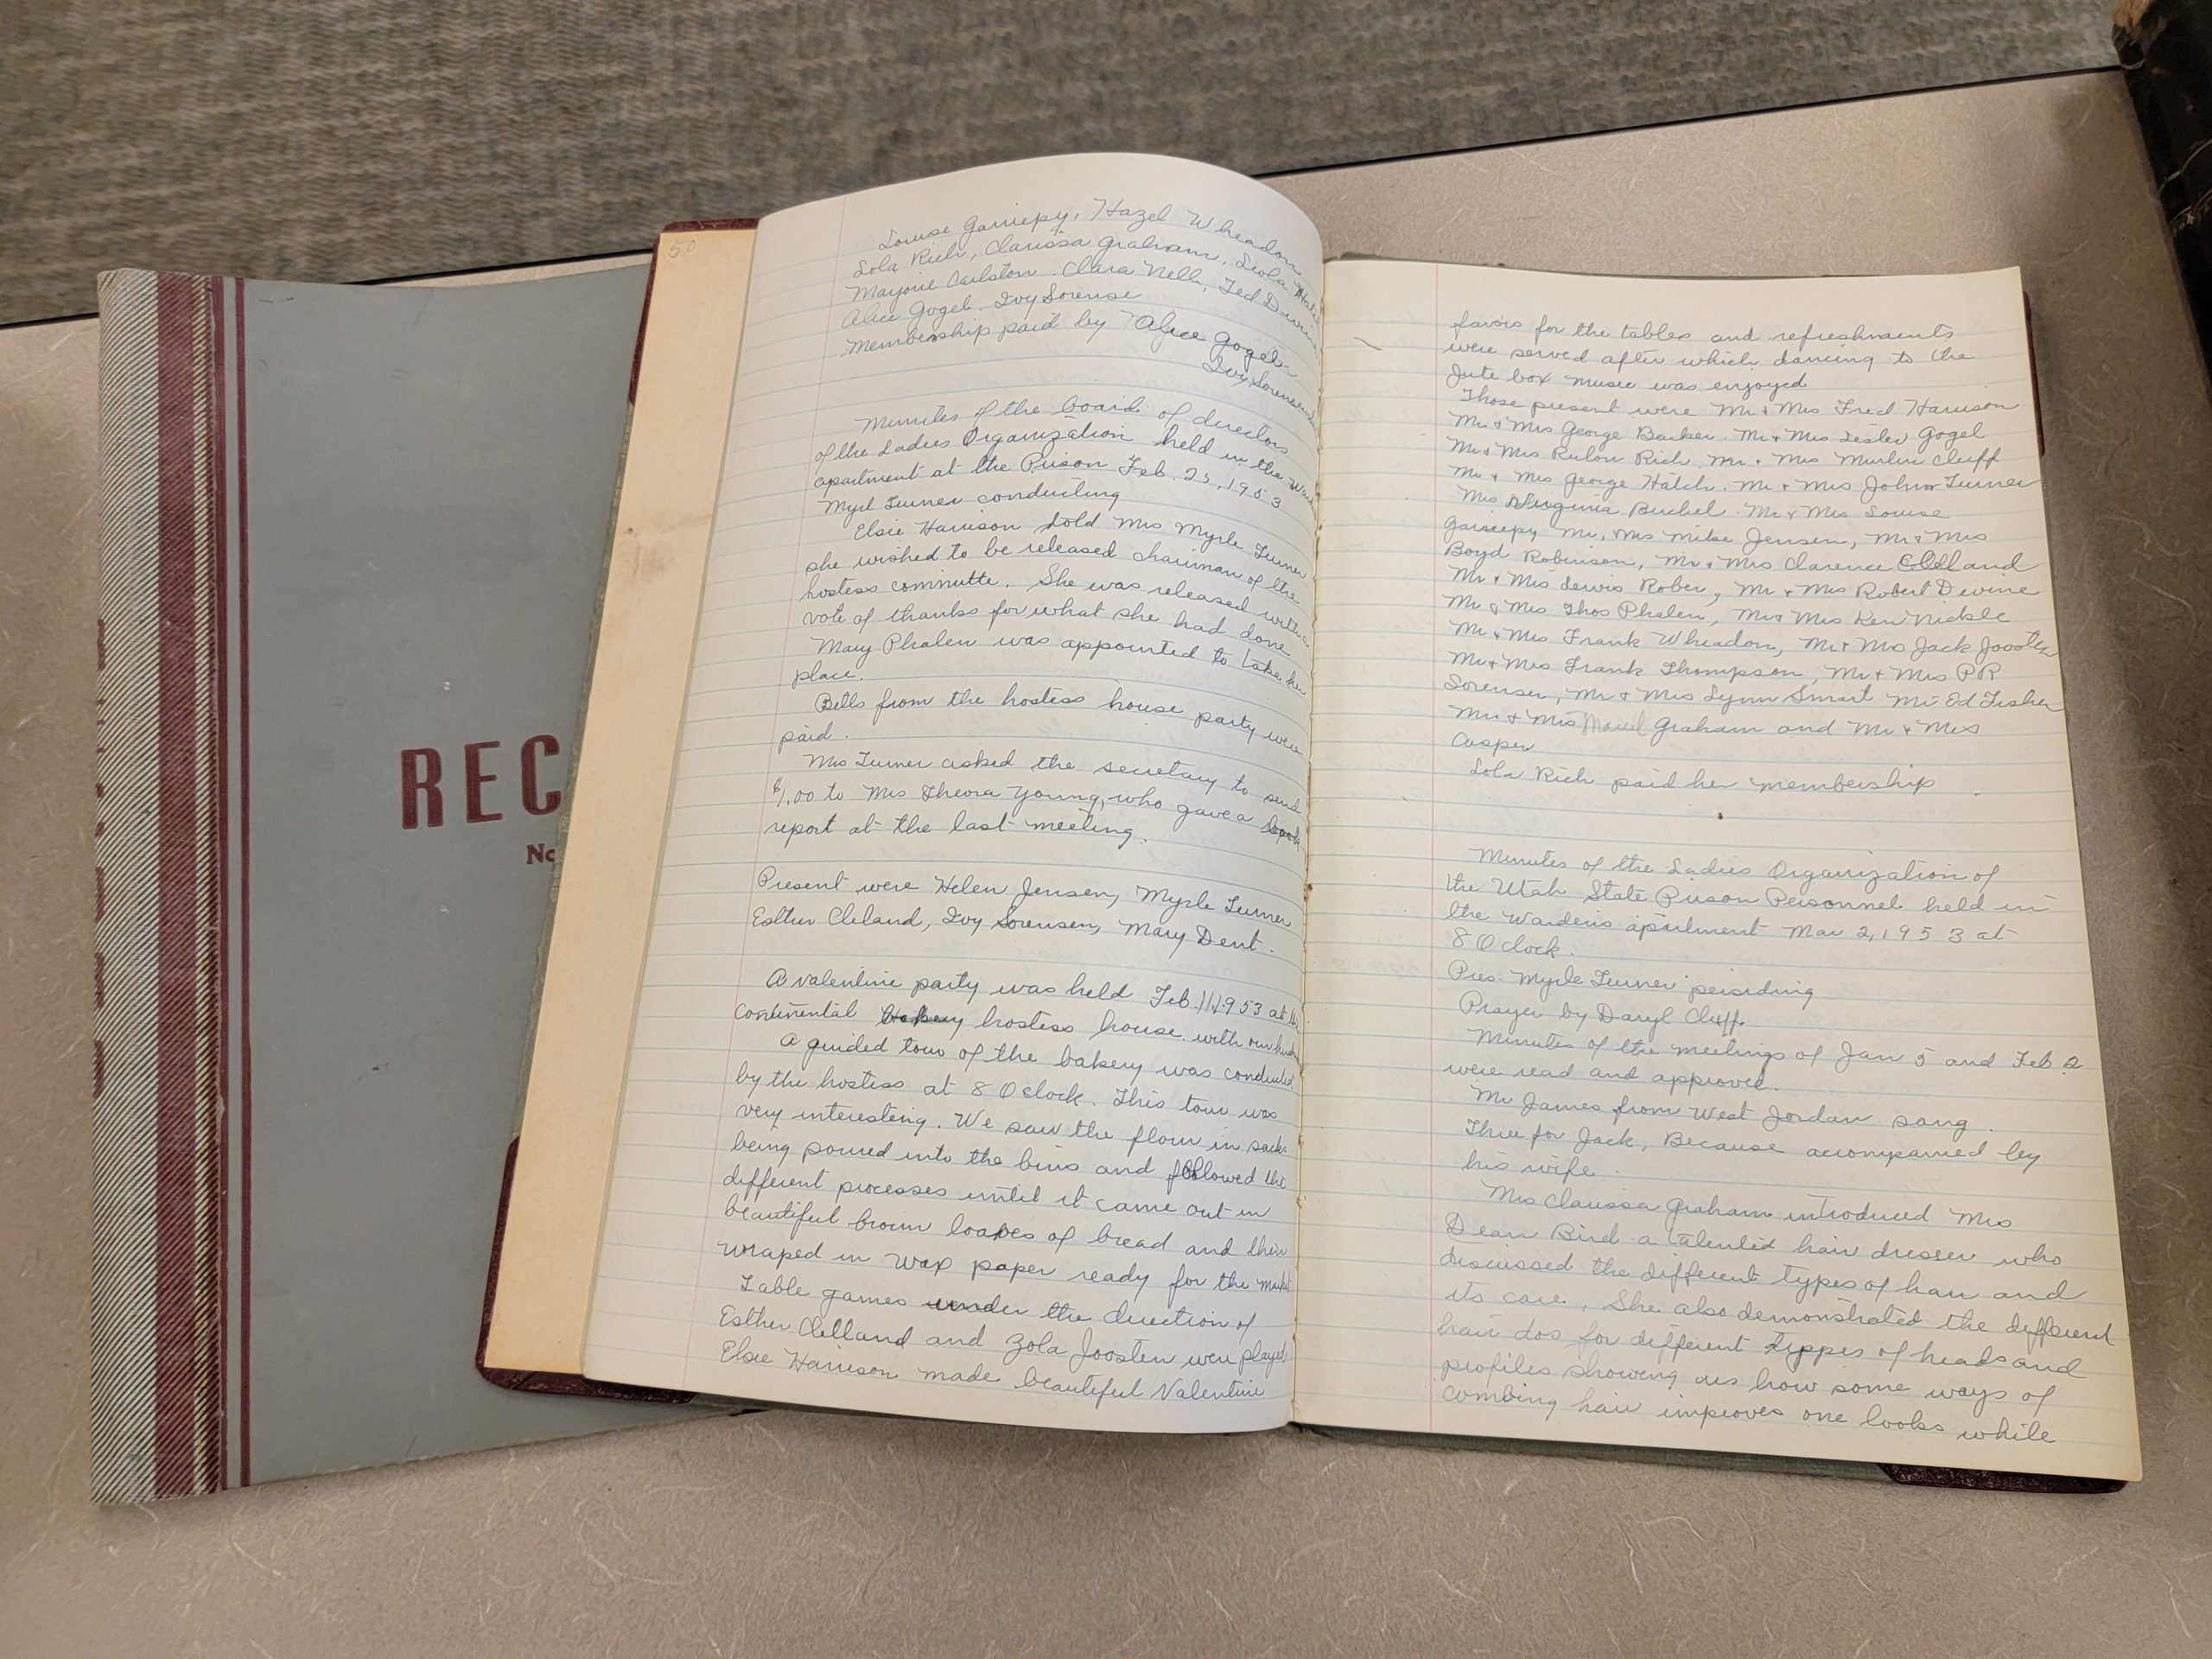 Featured image for “New Finding Aids at the Archives: January 2022”